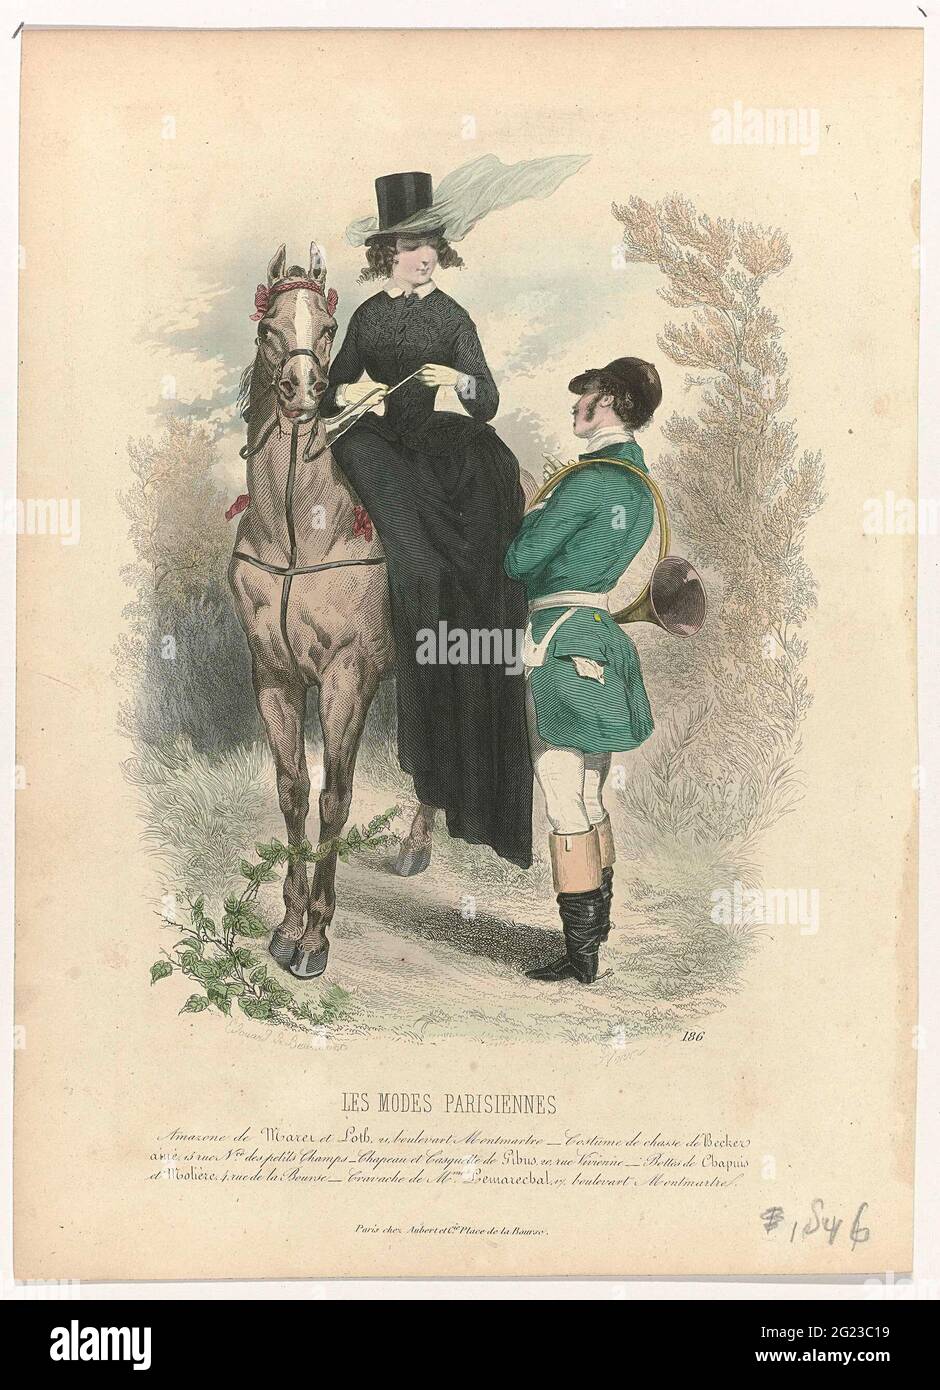 Les Modes Parisiennes, 1846, No. 186: Amazon de Marel et Loth (...). Woman  in amazon seat on horseback; In addition to her a man with hunting horn  over the shoulder. According to